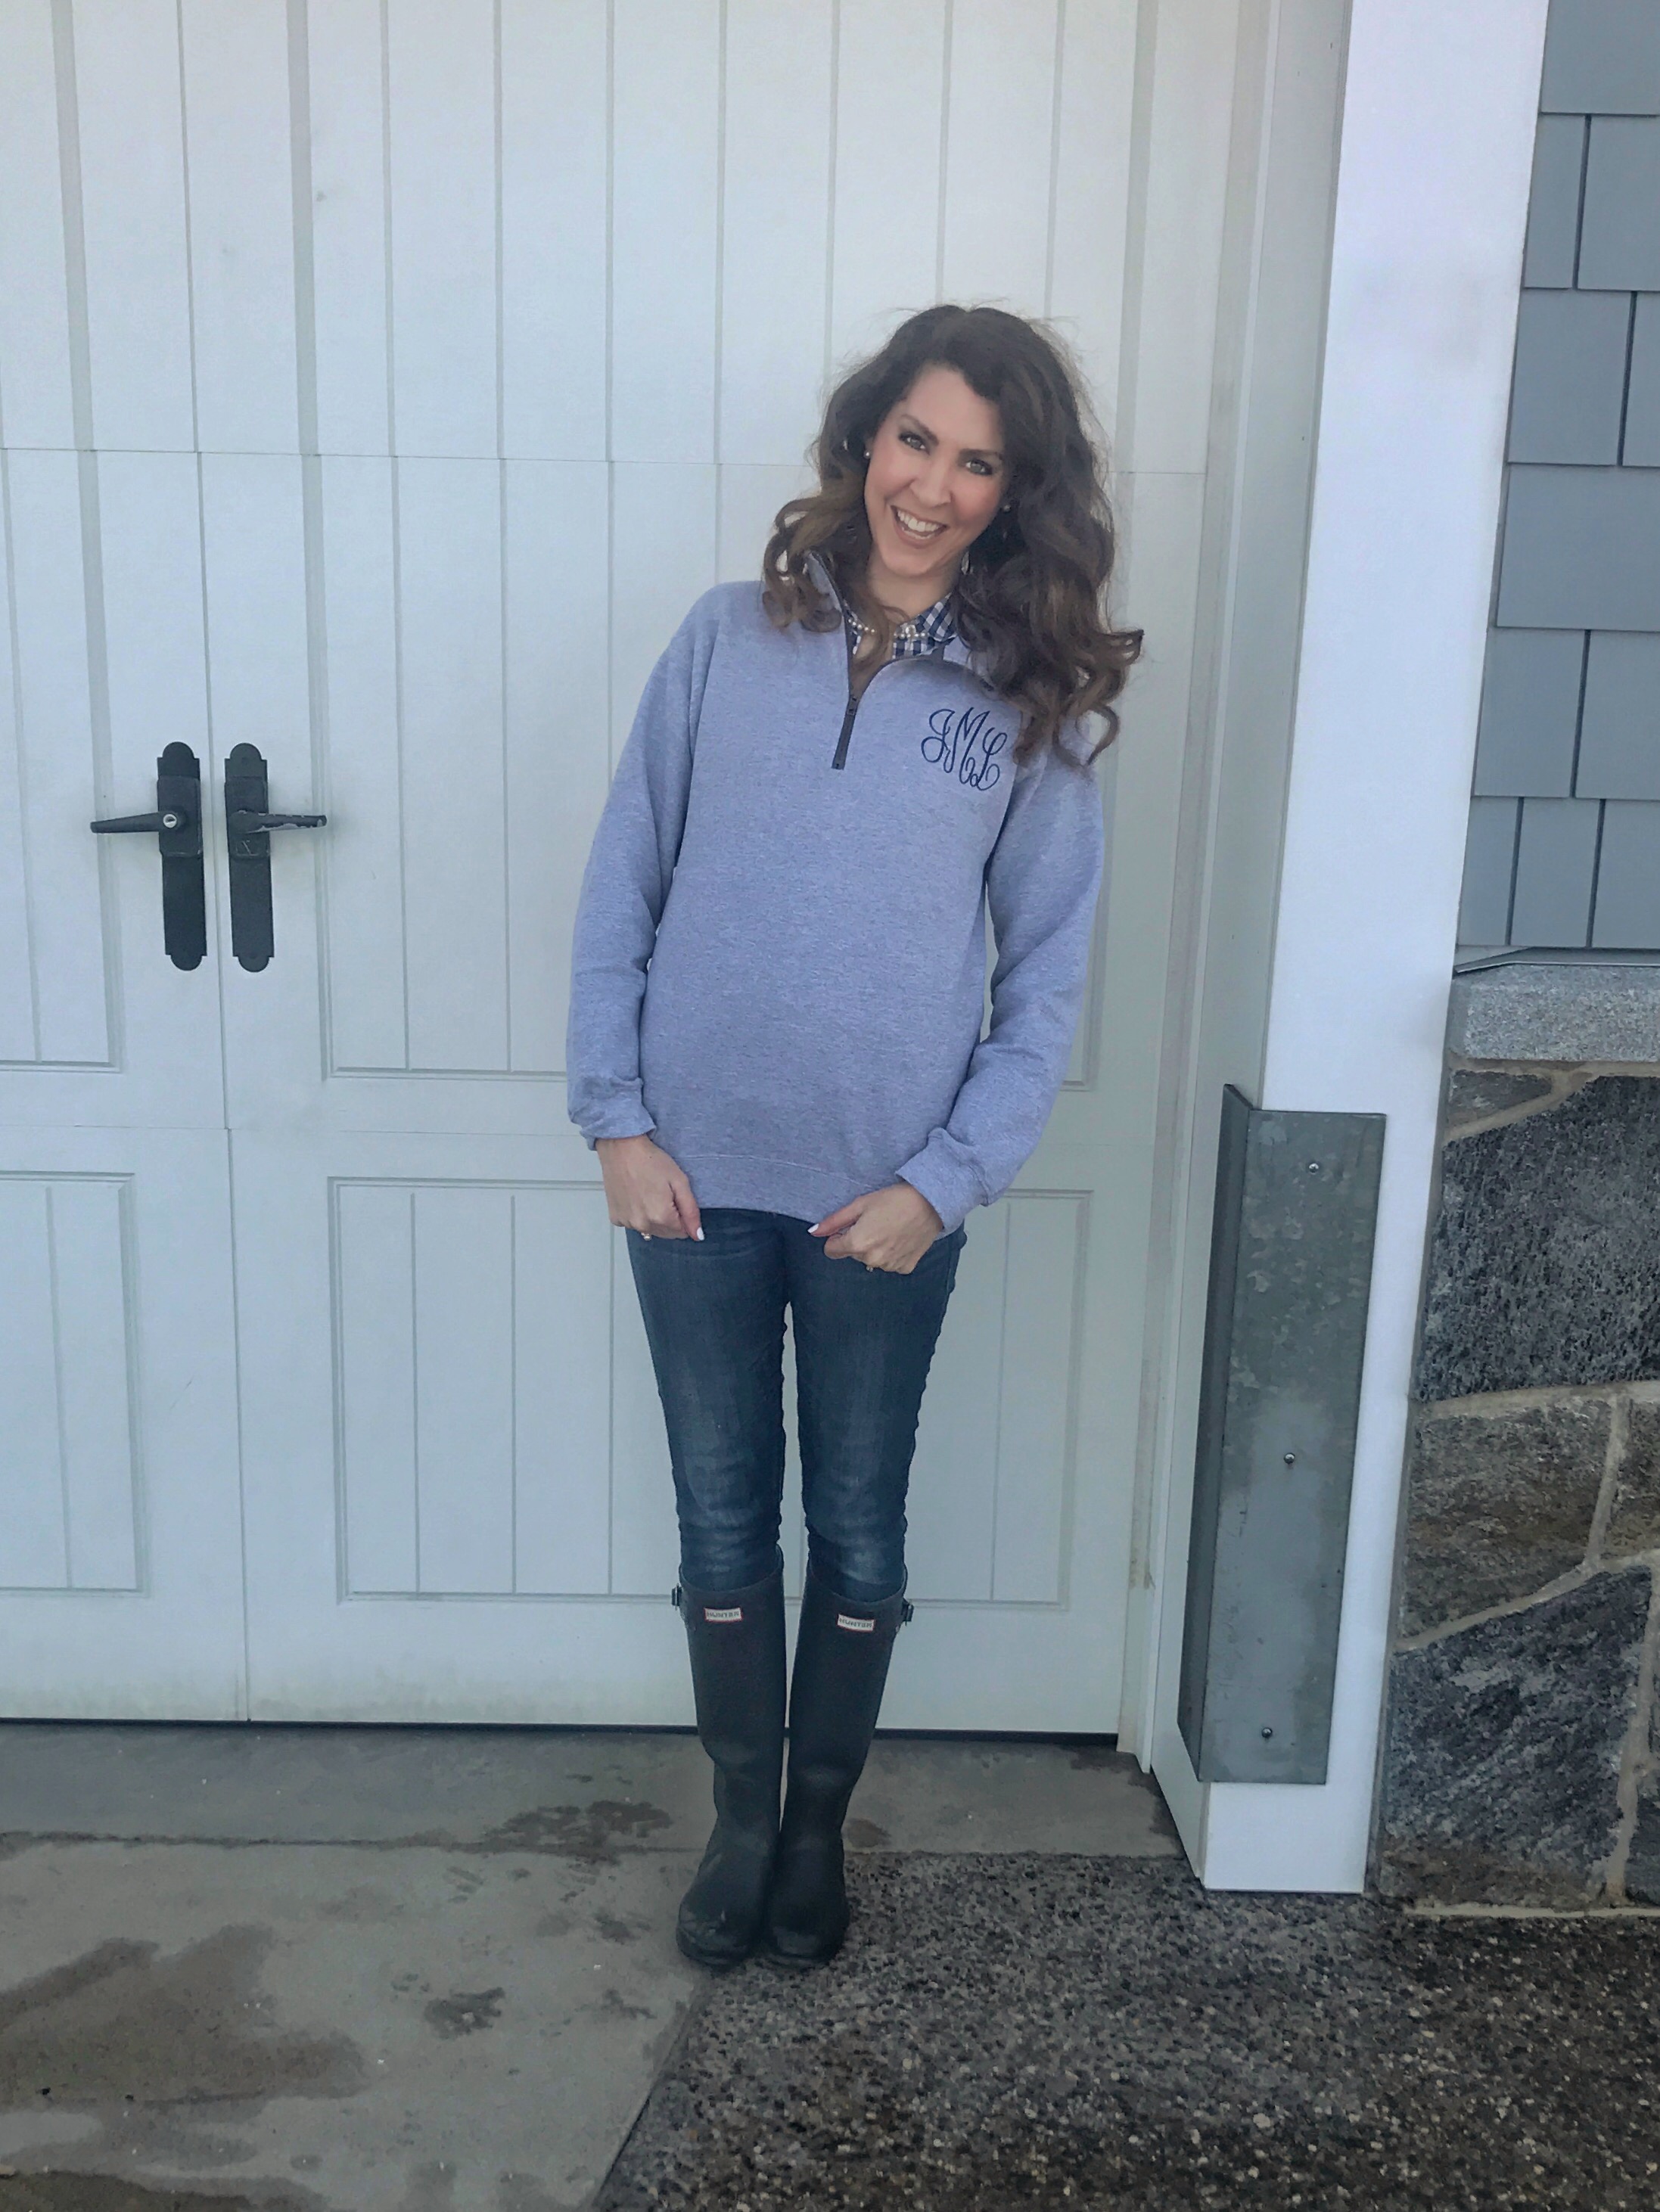 Grey monogrammed Jane pullover, navy gingham Vineyard Vines button up shirt, navy Hunter rain boots - February beach day in New England - From the Closet - From the Family with Love